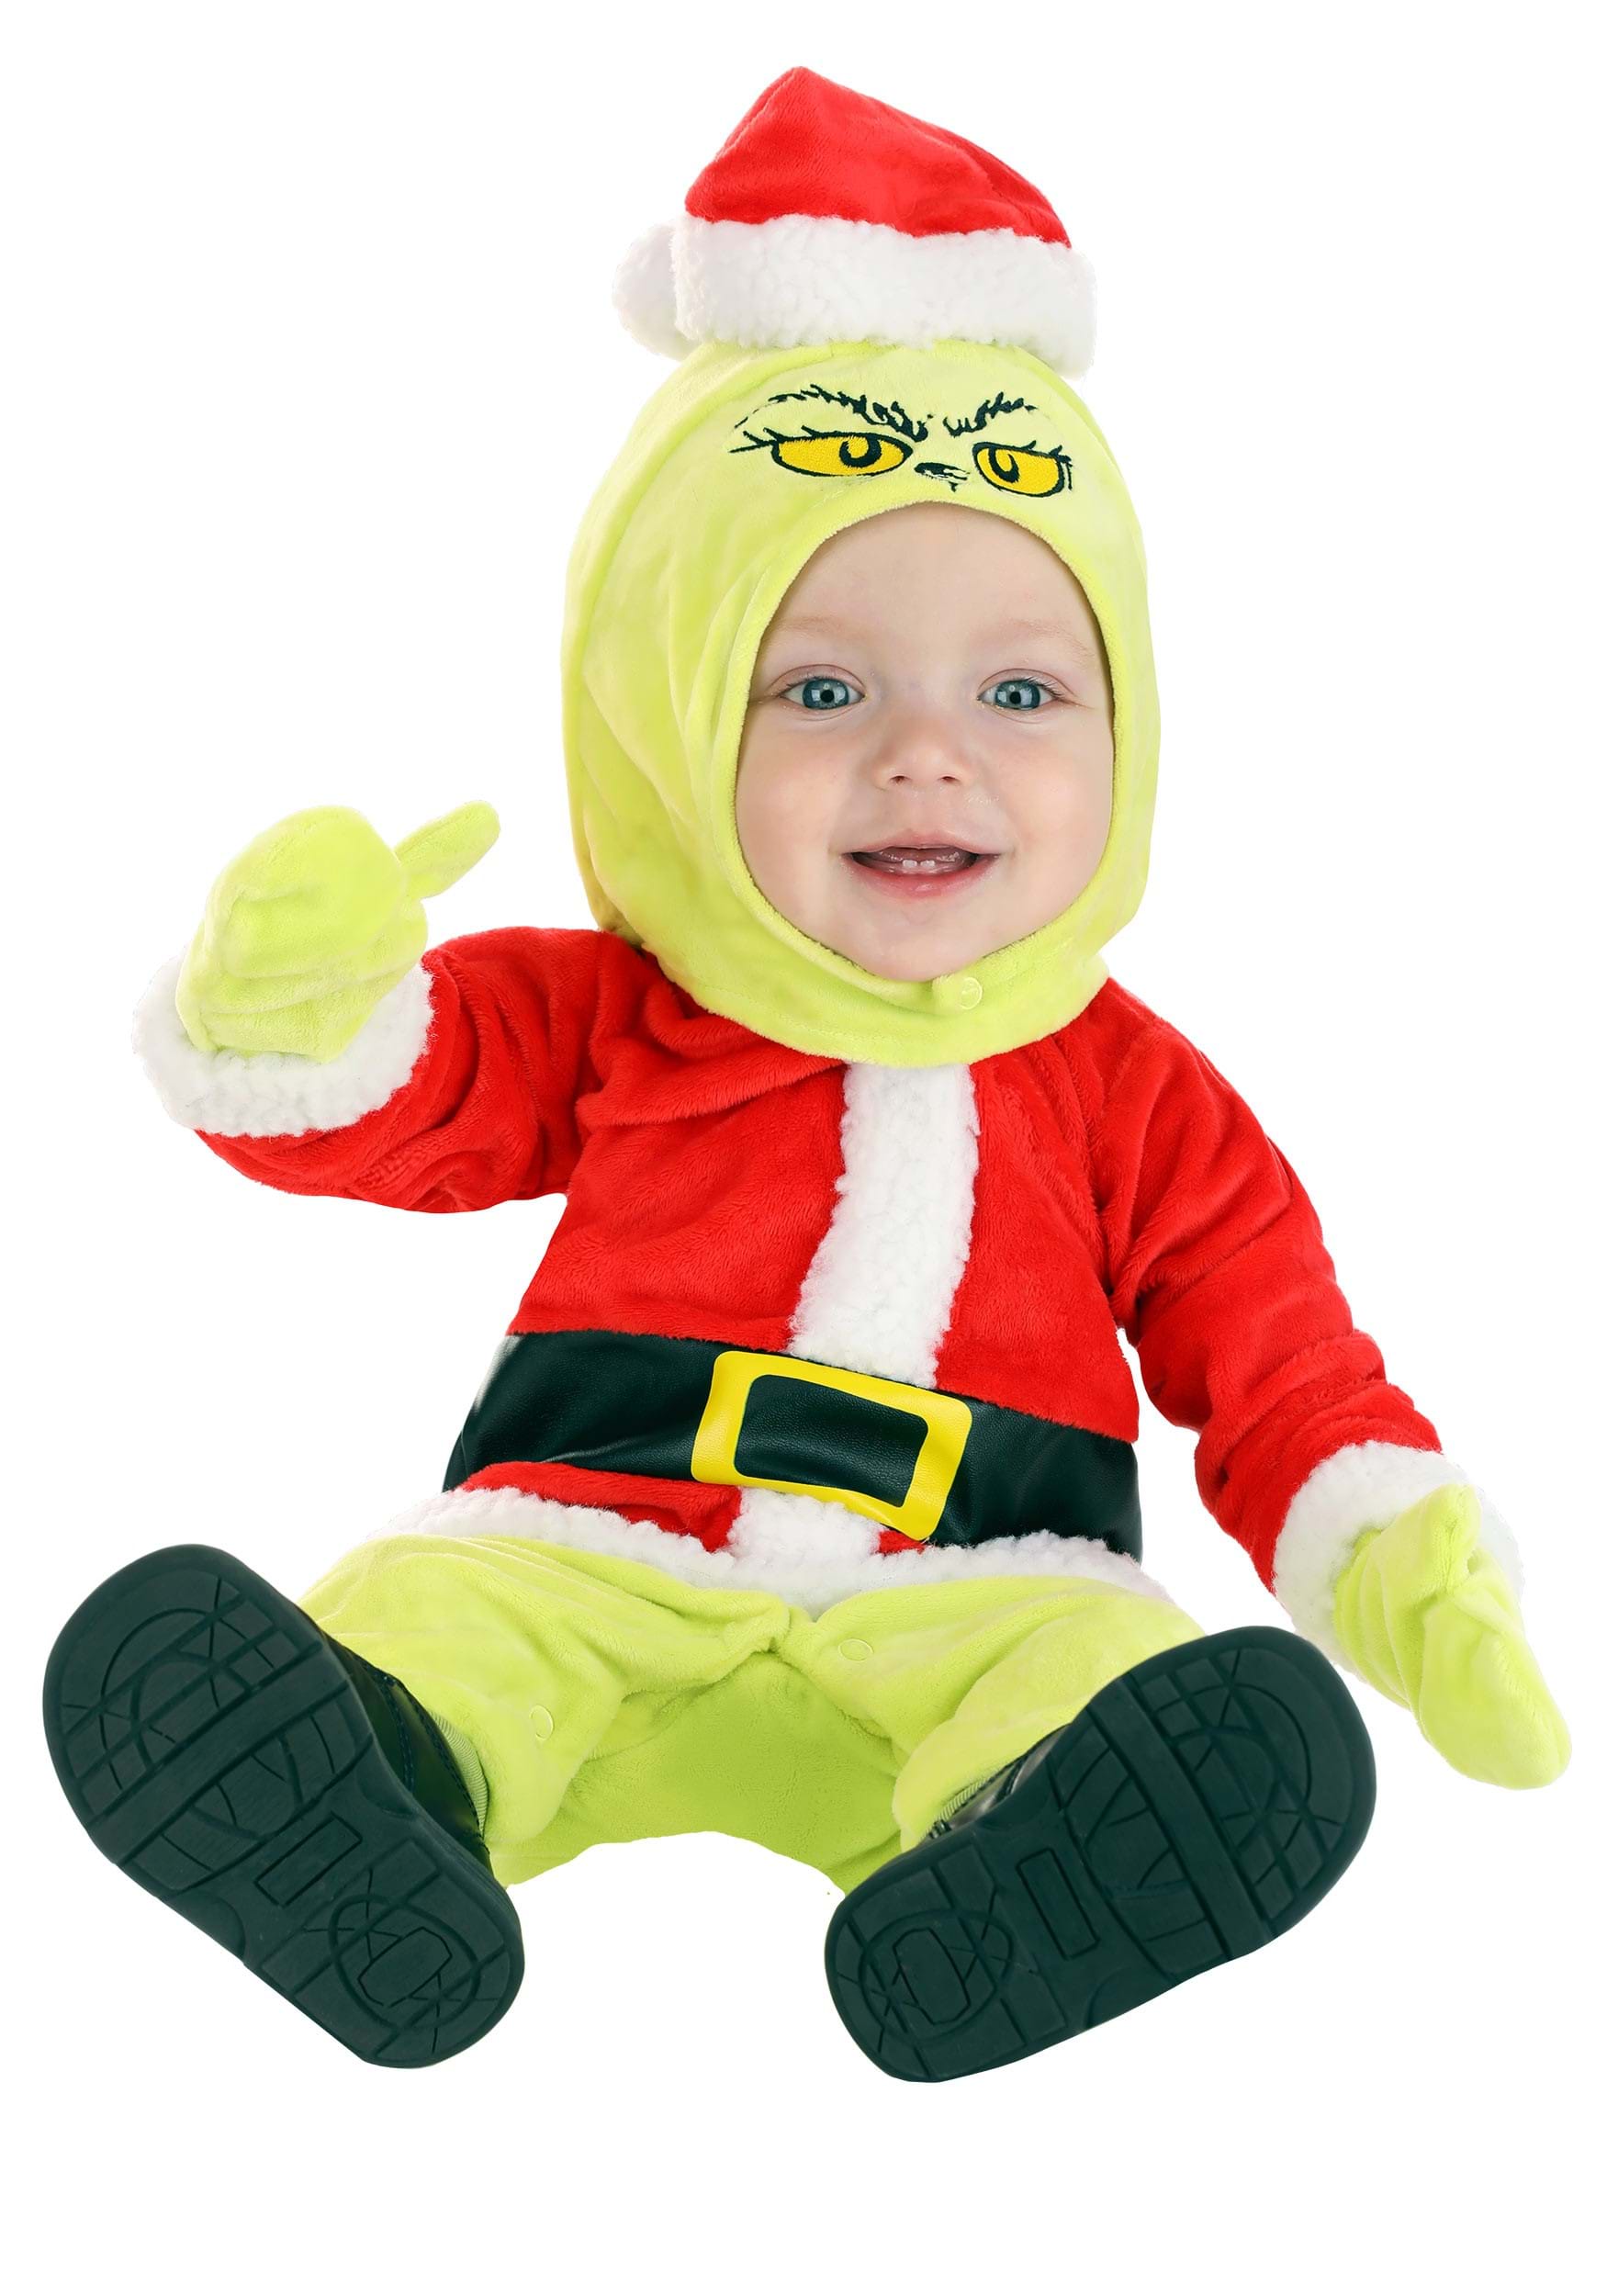 Photos - Fancy Dress SanTa FUN Costumes The Grinch  Costume for Infants Black/Green/Red 